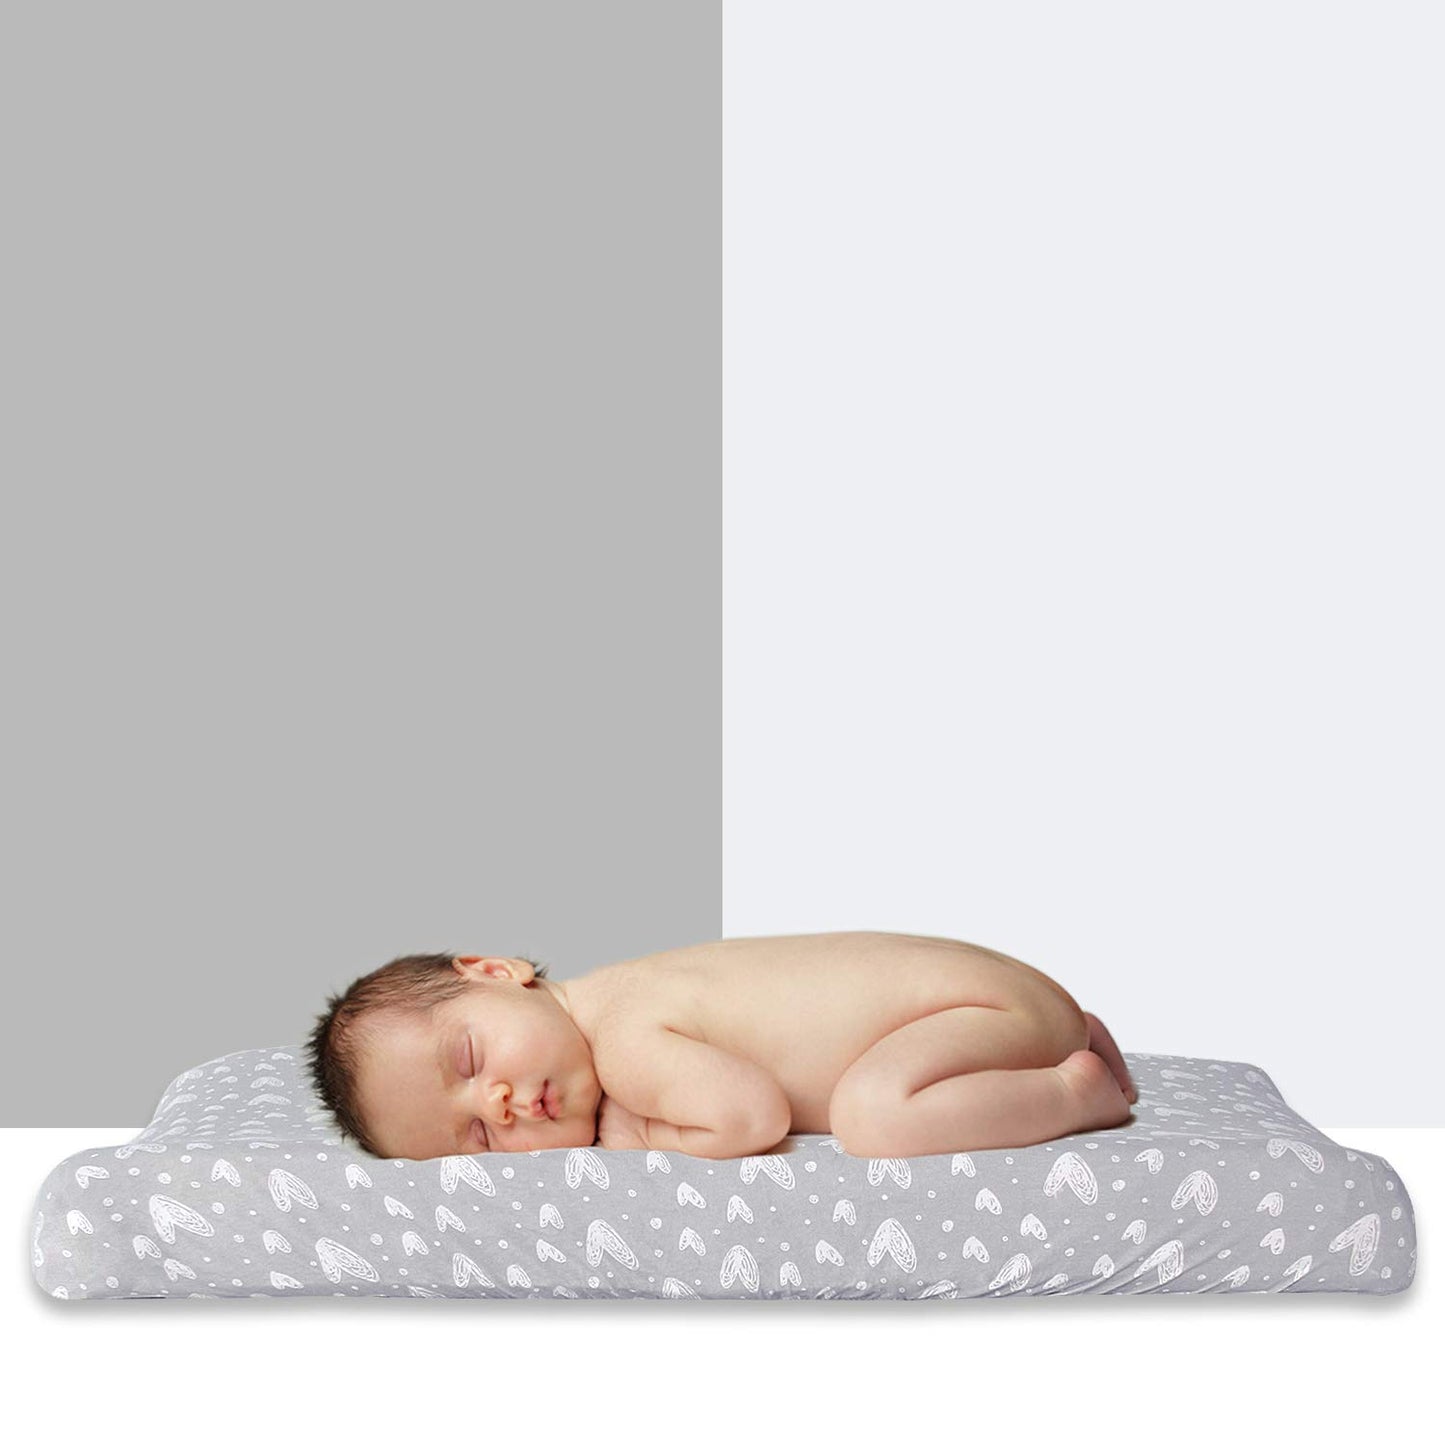 Changing Pad Cover - 2 Pack, 100% Jersey Knit Cotton - Biloban Online Store